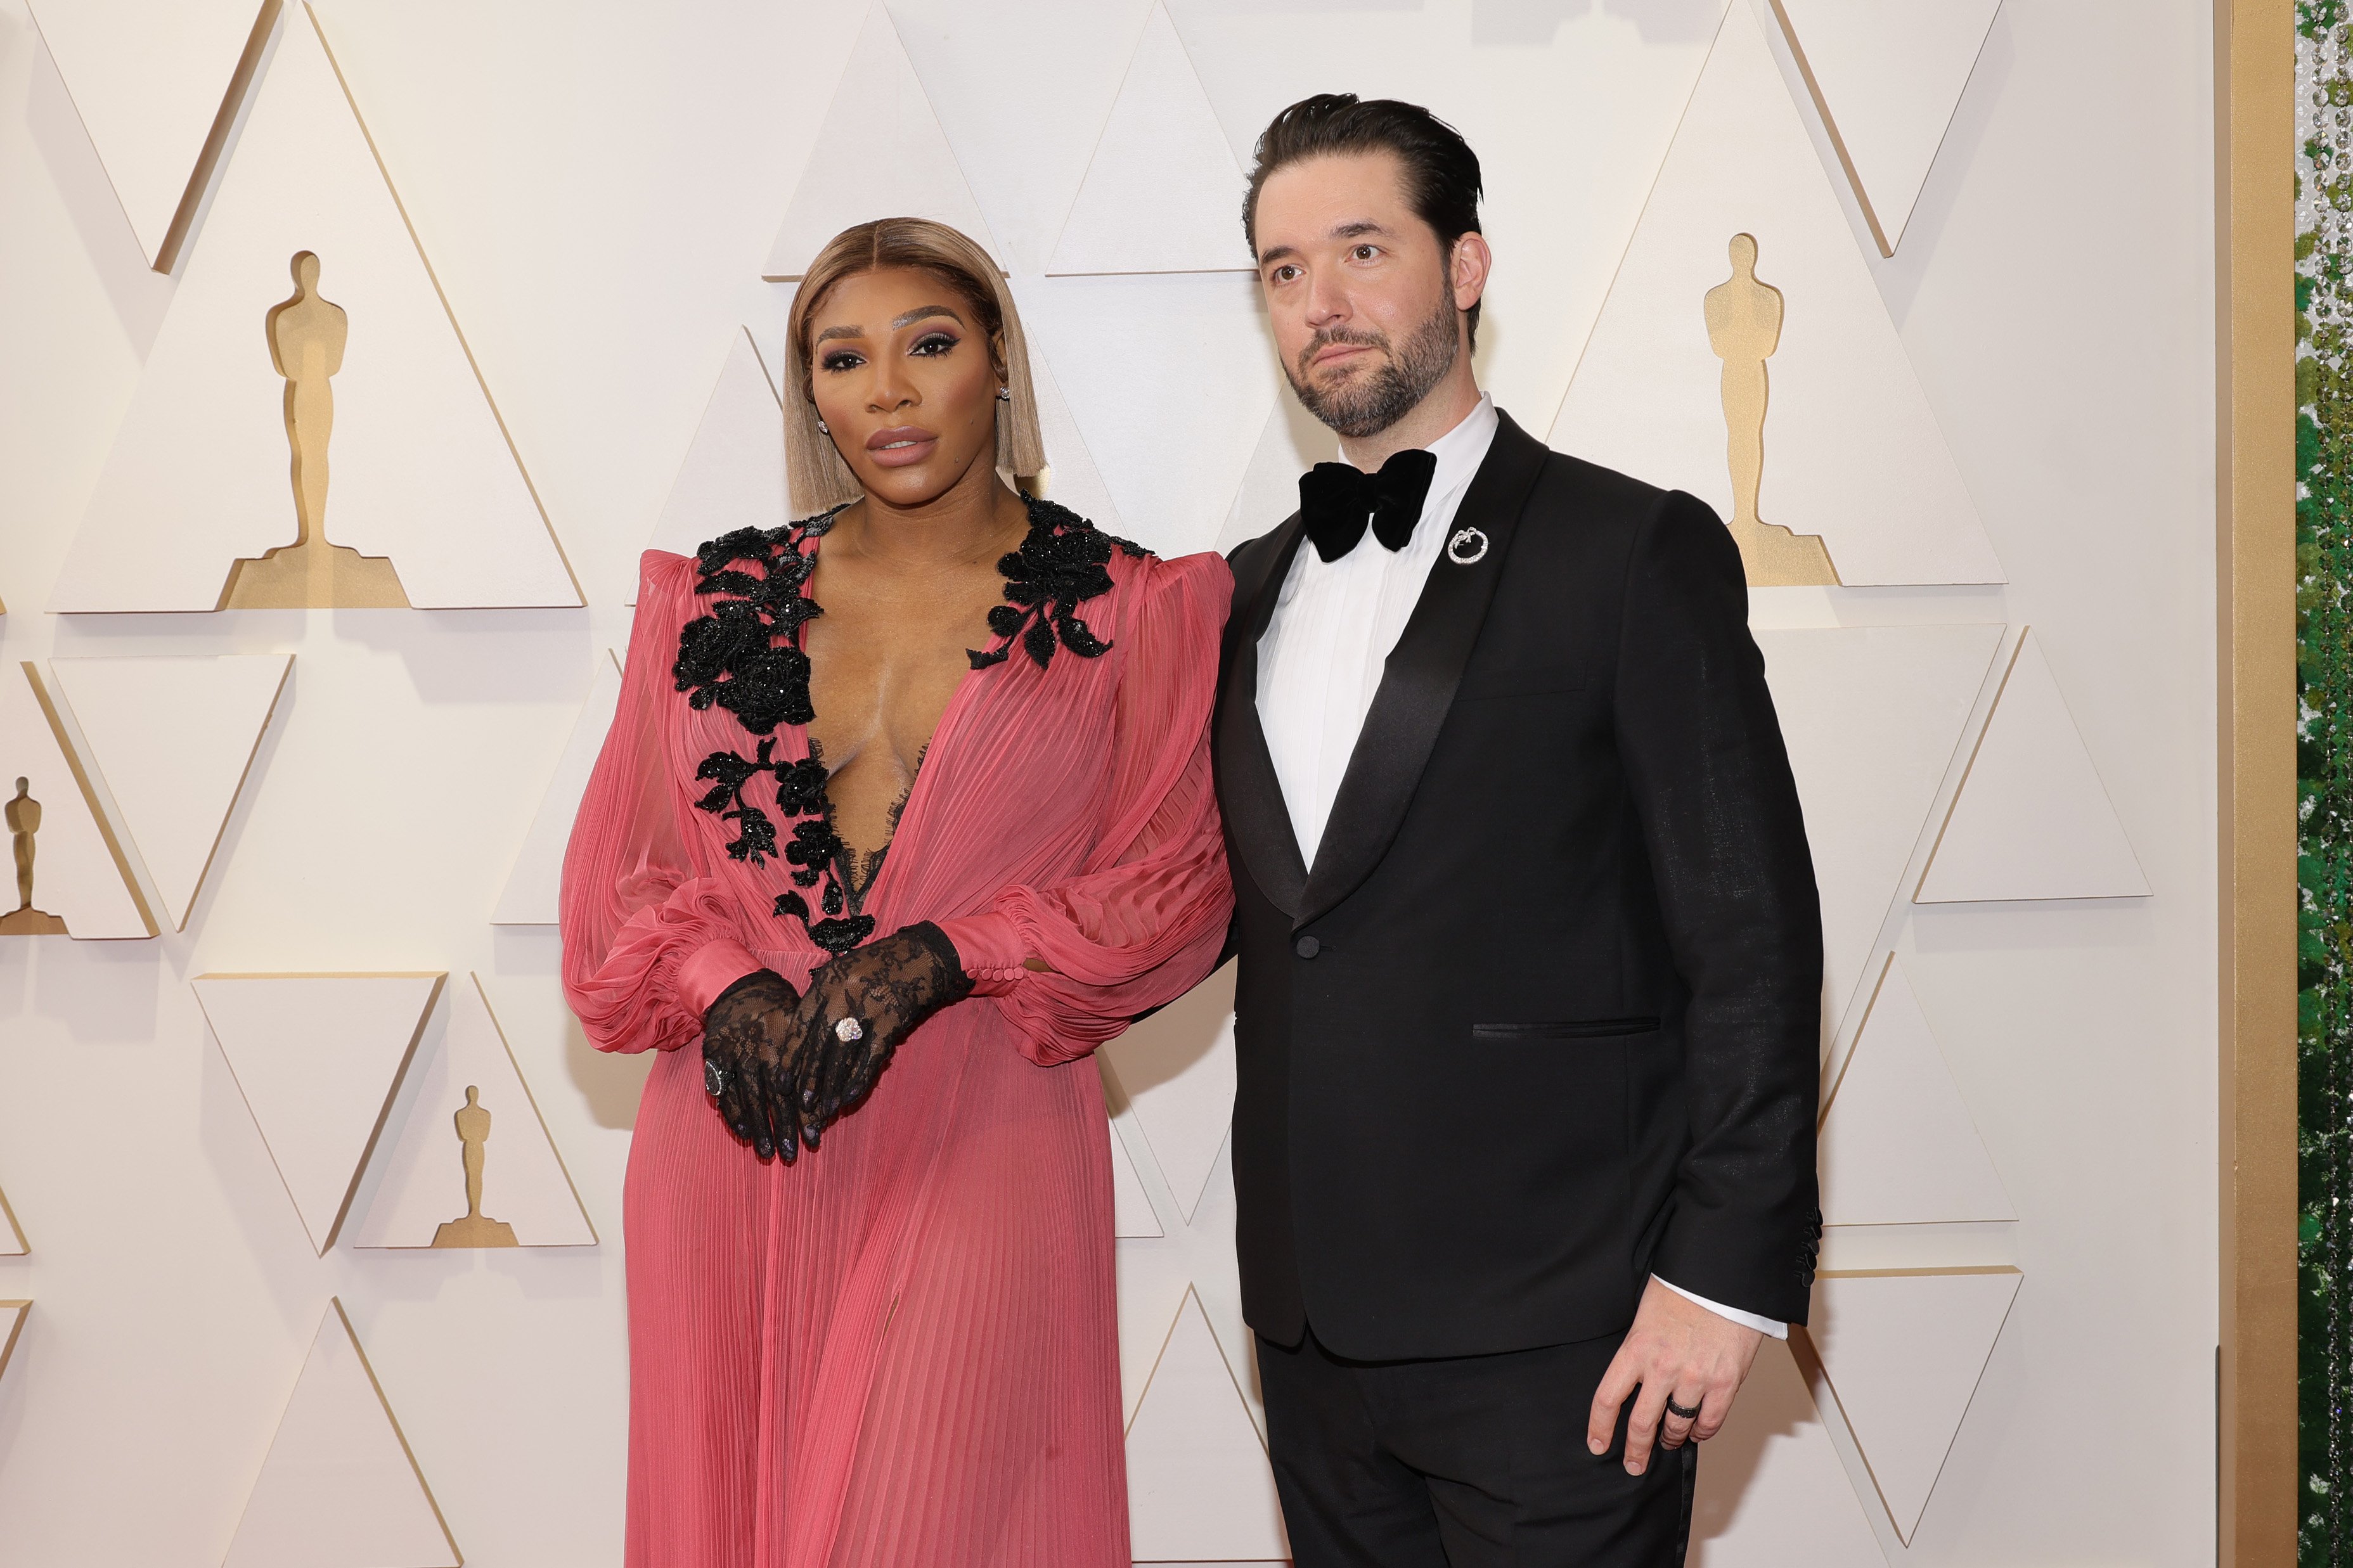 Serena Williams and Alexis Ohanian at the 94th Annual Academy Awards on March 27, 2022 | Sources: Getty Images